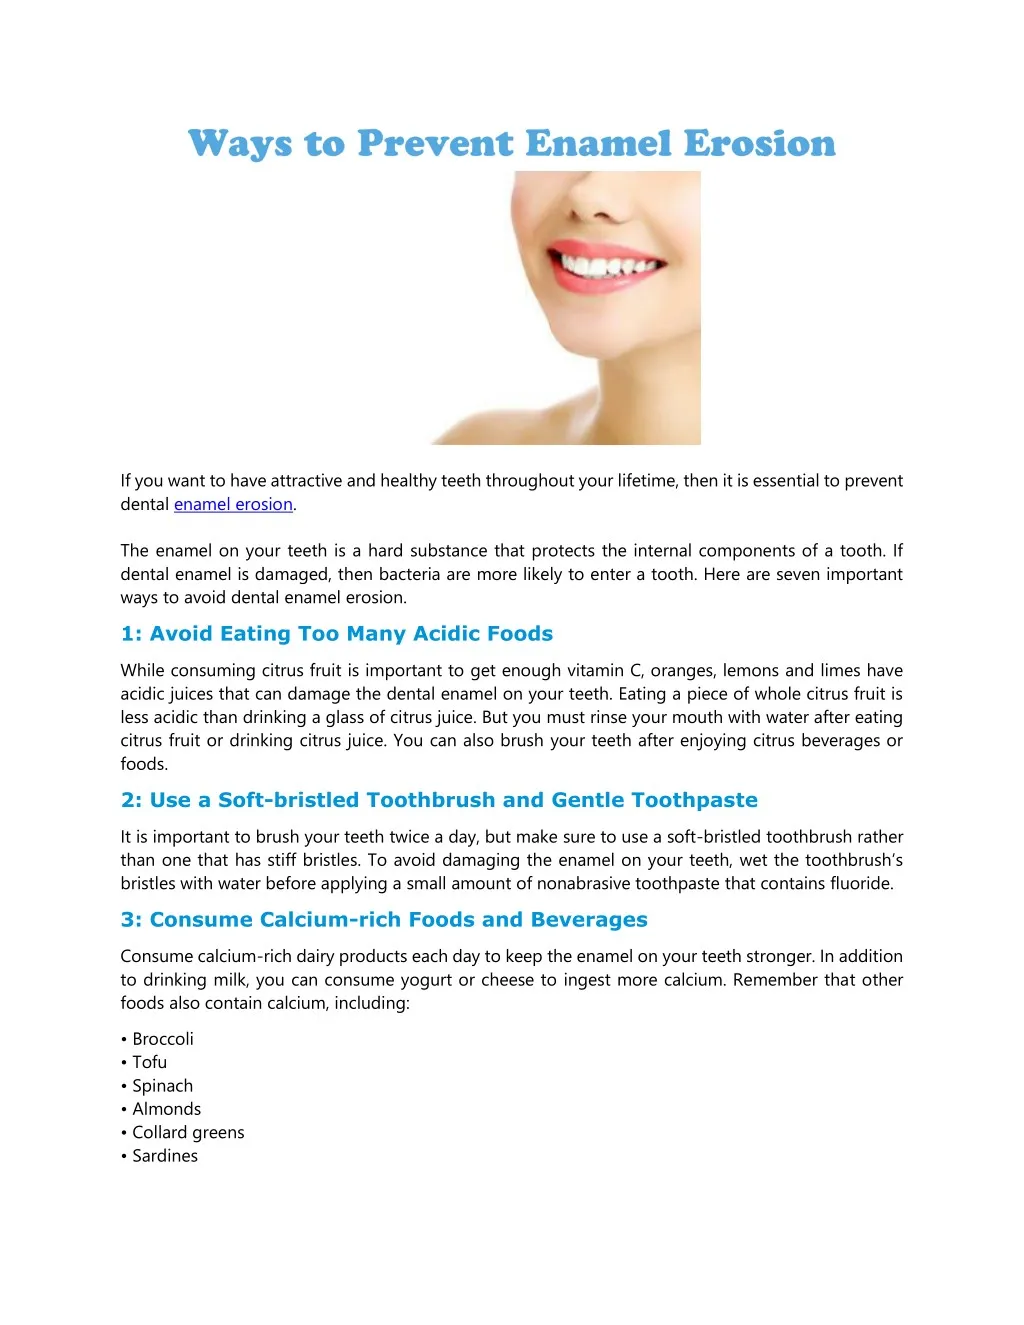 if you want to have attractive and healthy teeth